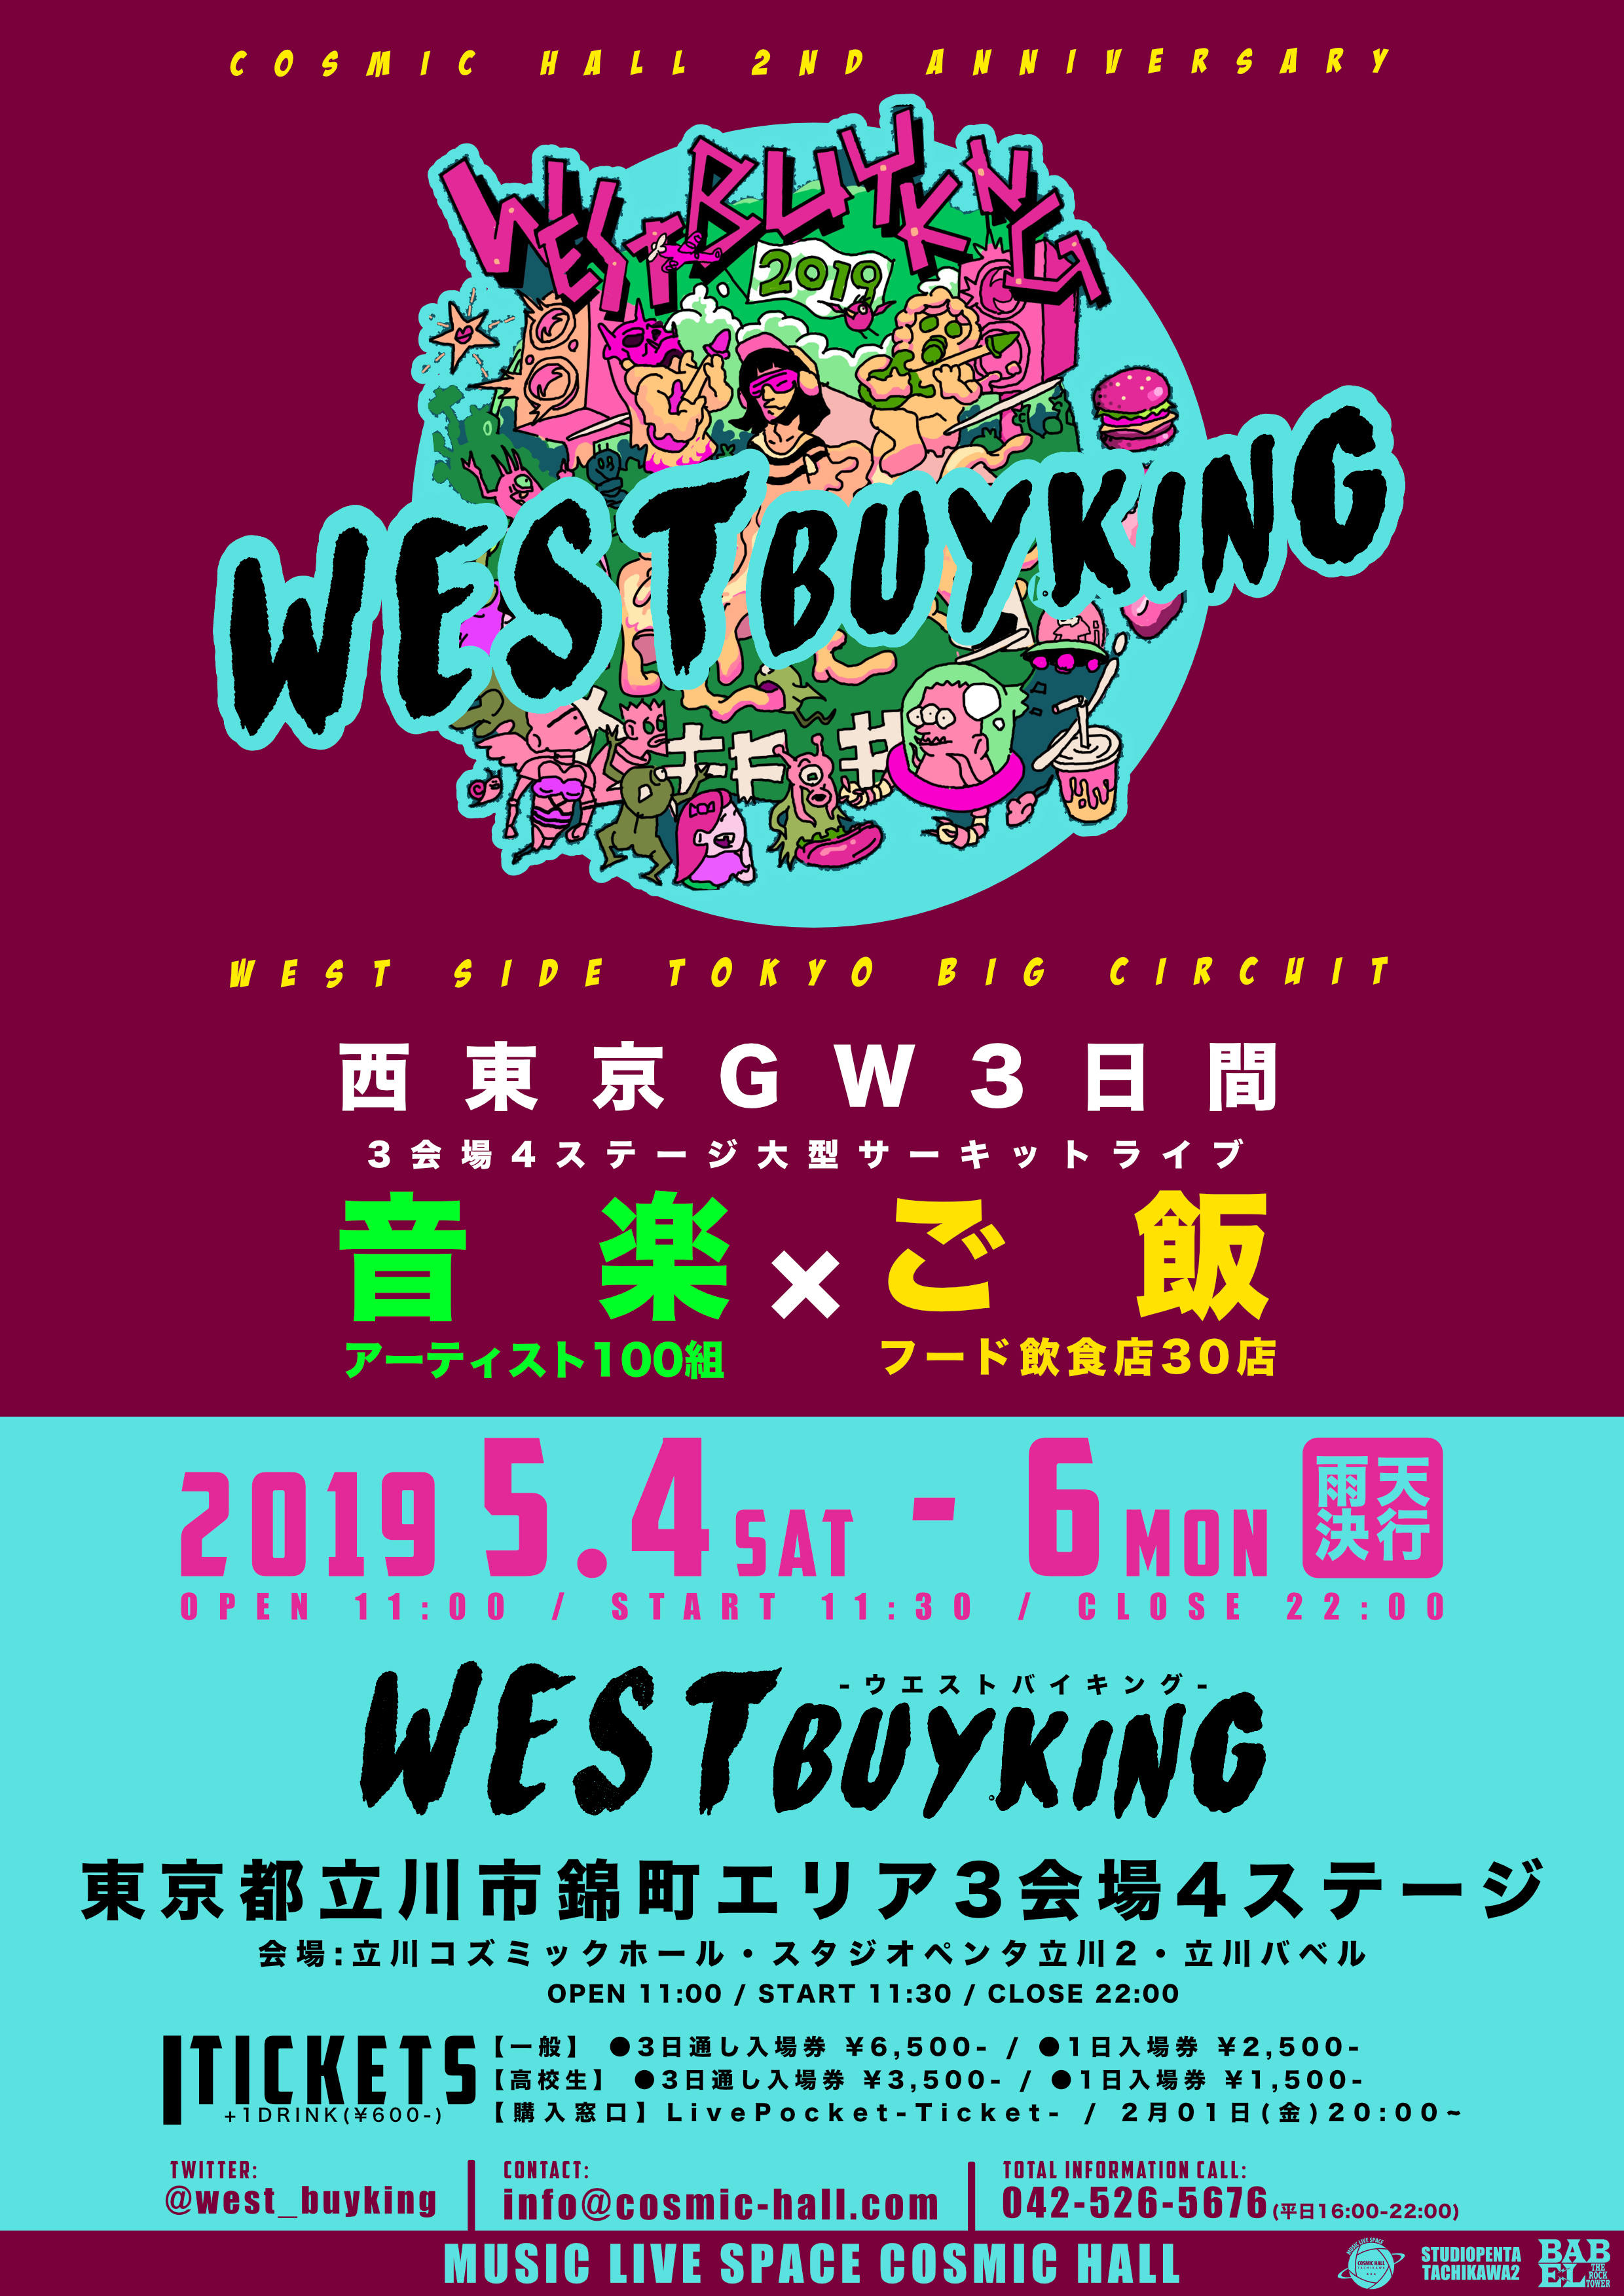 「WEST BUY KING 2019」 〜COSMIC HALL 2nd Anniversary〜